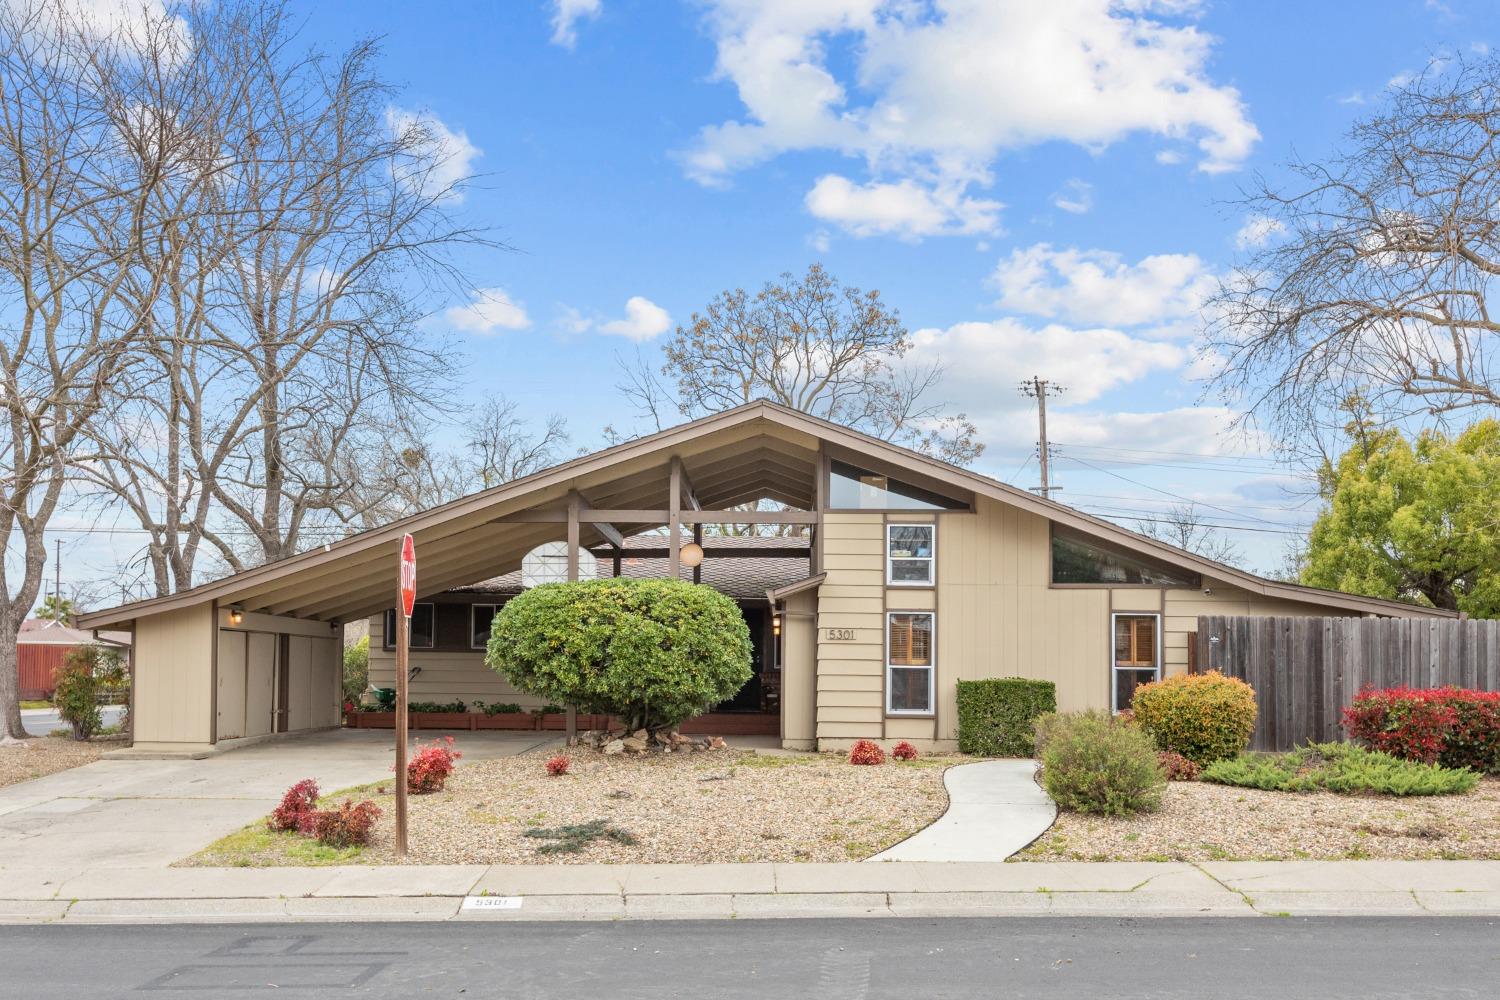 Photo of 5301 Fort Sutter Wy in Sacramento, CA